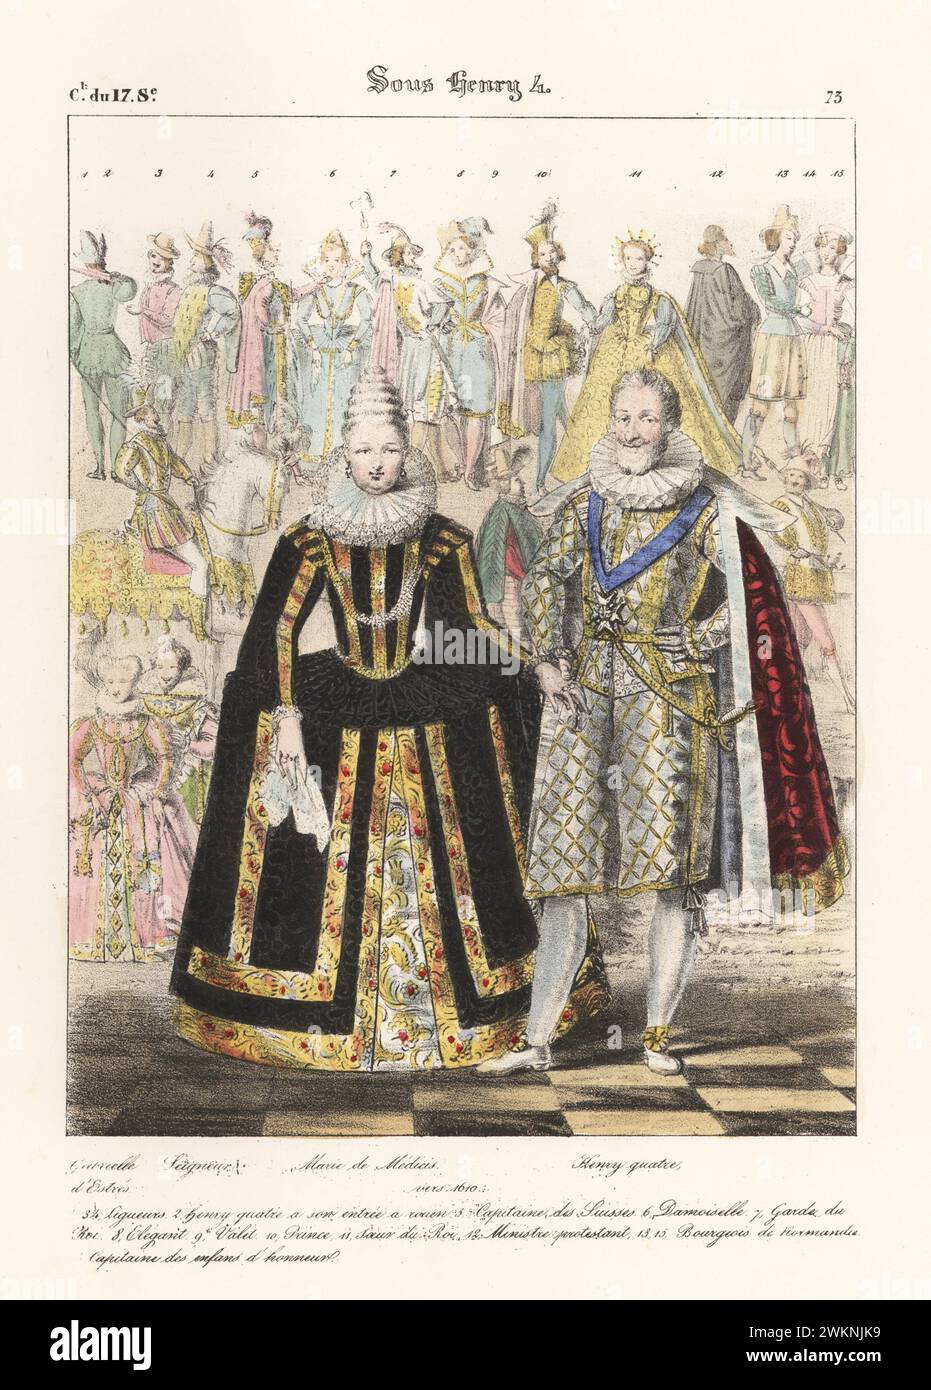 King Henry IV of France and second wife, Marie de Medicis in their wedding outfits, 1600. King in ruff collar, doublet and breeches, hose, with cross of the Order of the Holy Spirit. Mary in gown with embroidered hoopskirts. Gabrielle d'Estres, Seigneur, Marie de Medicis, Henry 4. Sous Henry 4. Handcoloured lithograph by Godard after an illustration by Charles Auguste Herbé from his own Costumes Francais, Civils, Militaires et Religieux, French Costumes, Civil, Military and Religious, Maison Martinet, Paris, 1837. Stock Photo